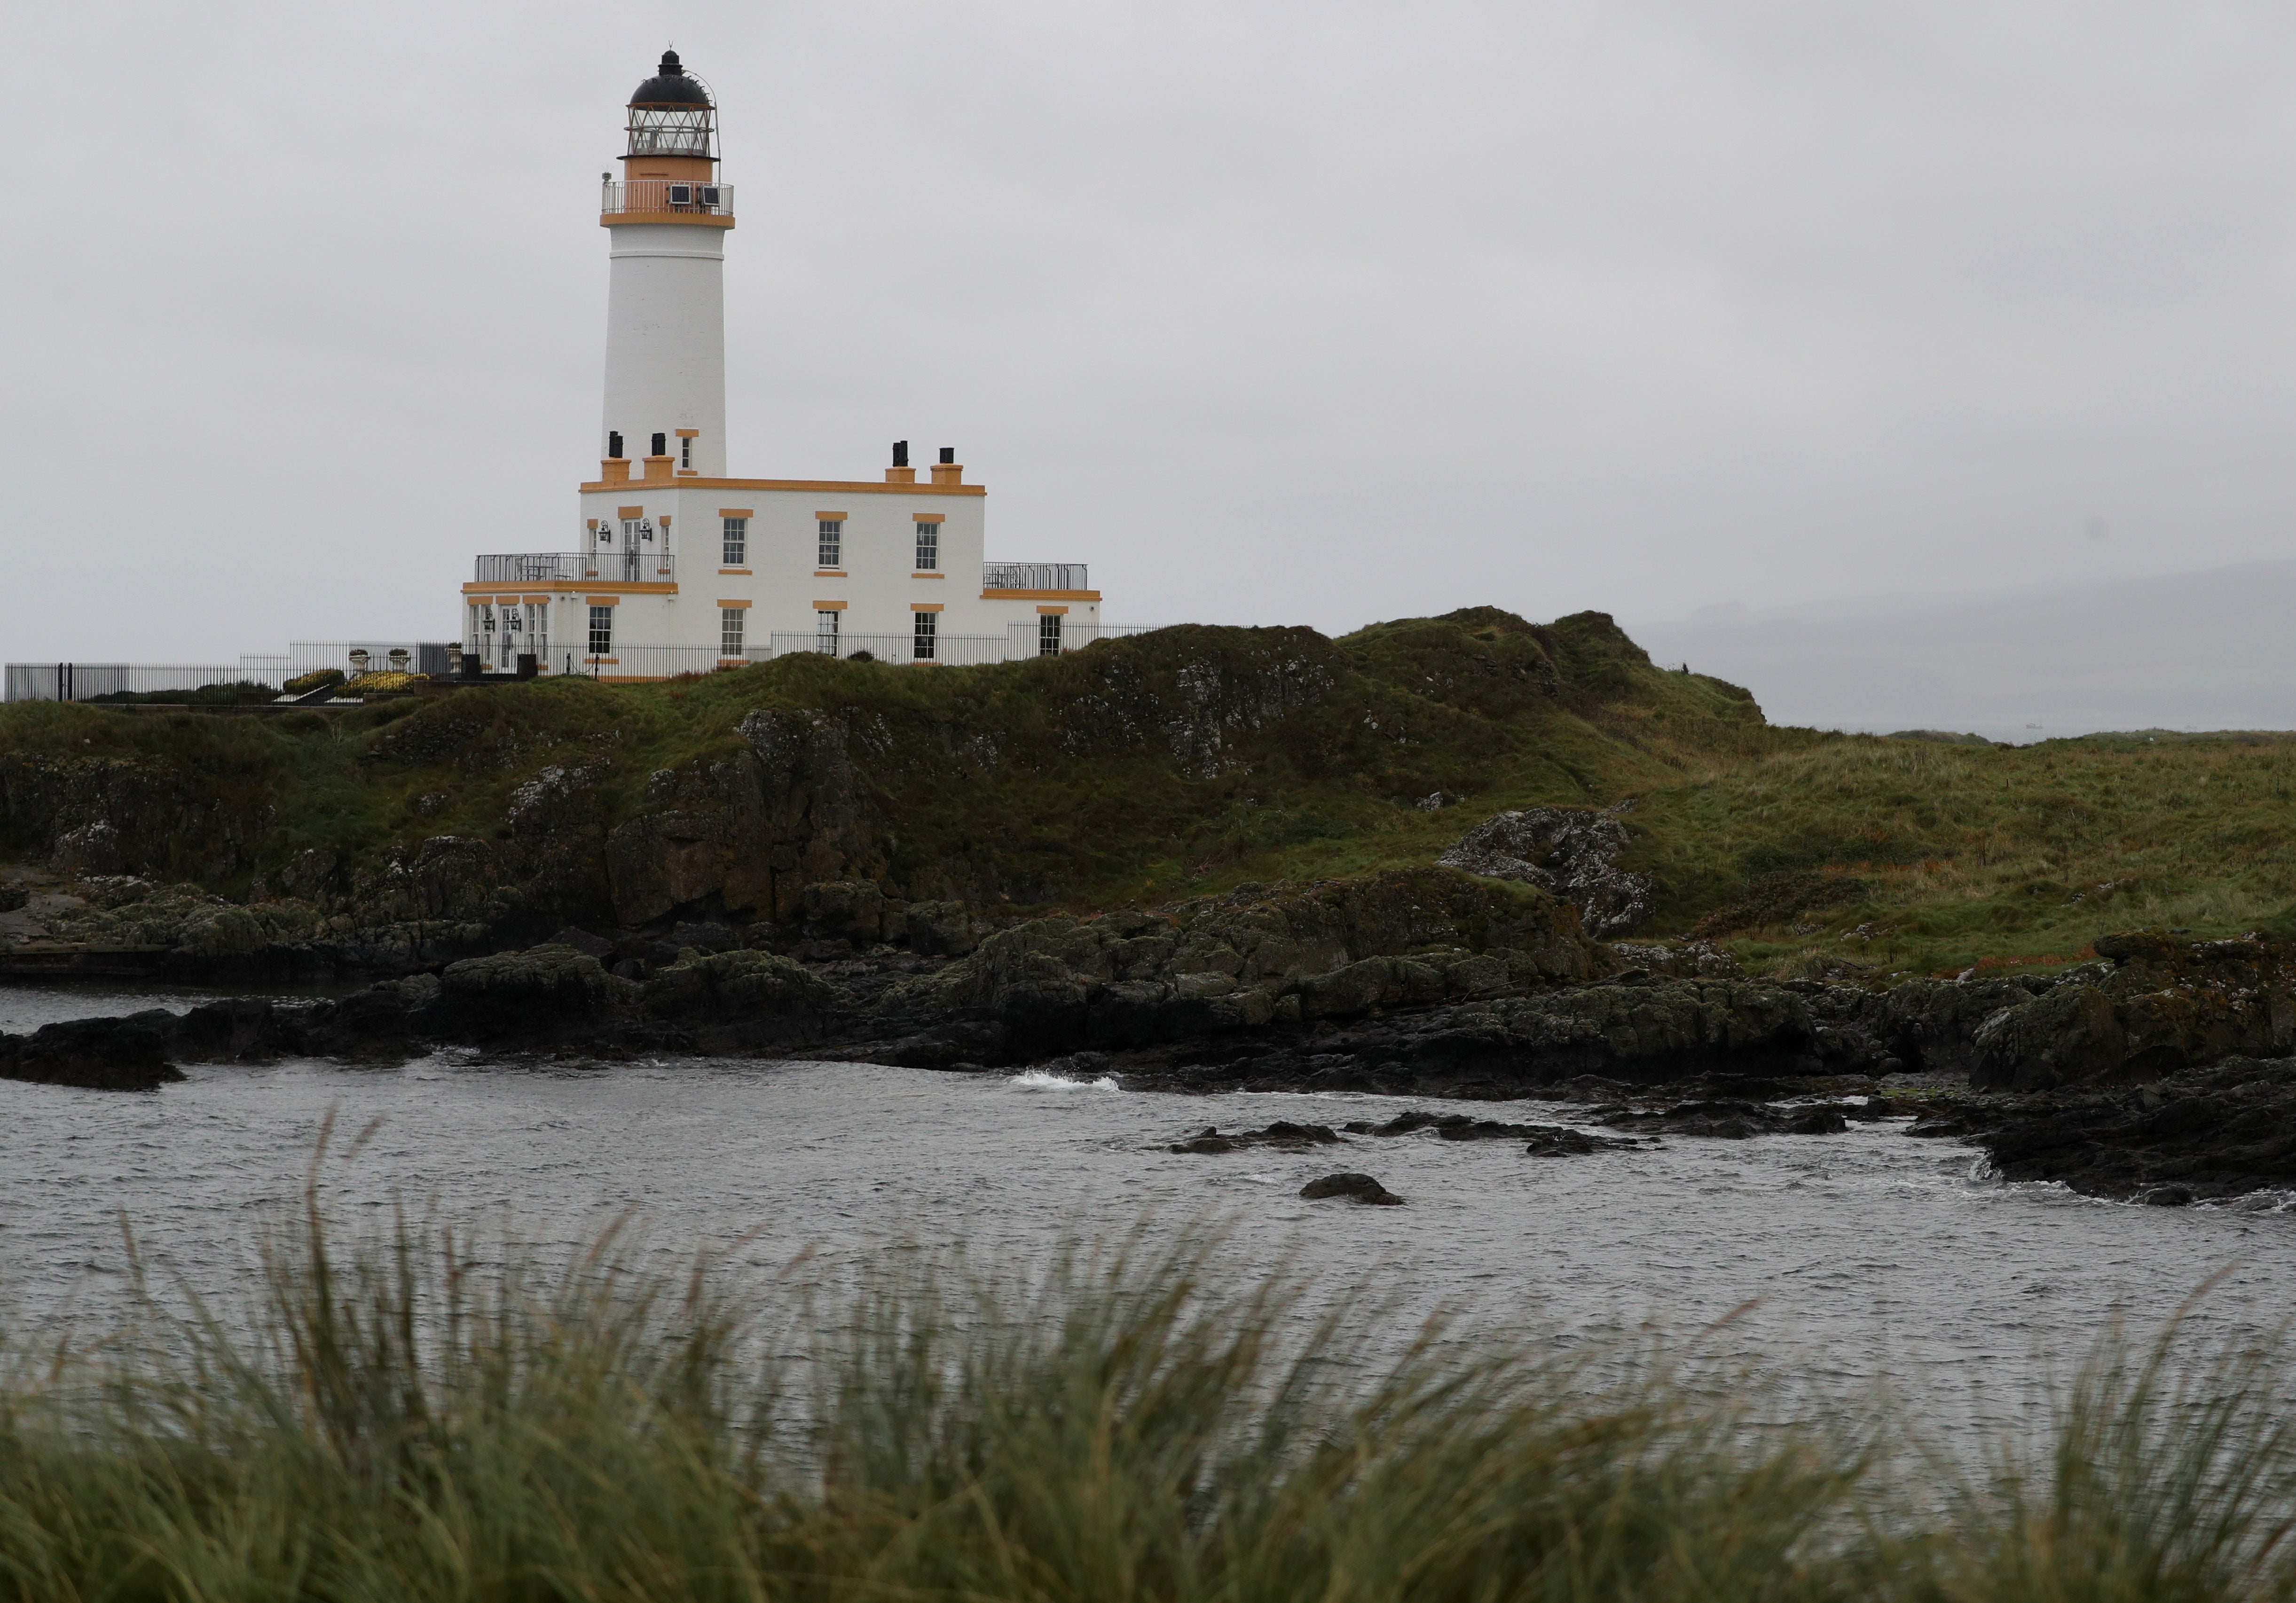 A view of the lighthouse on the Ailsa Championship Course at the Trump Turnberry resort in Ayrshire